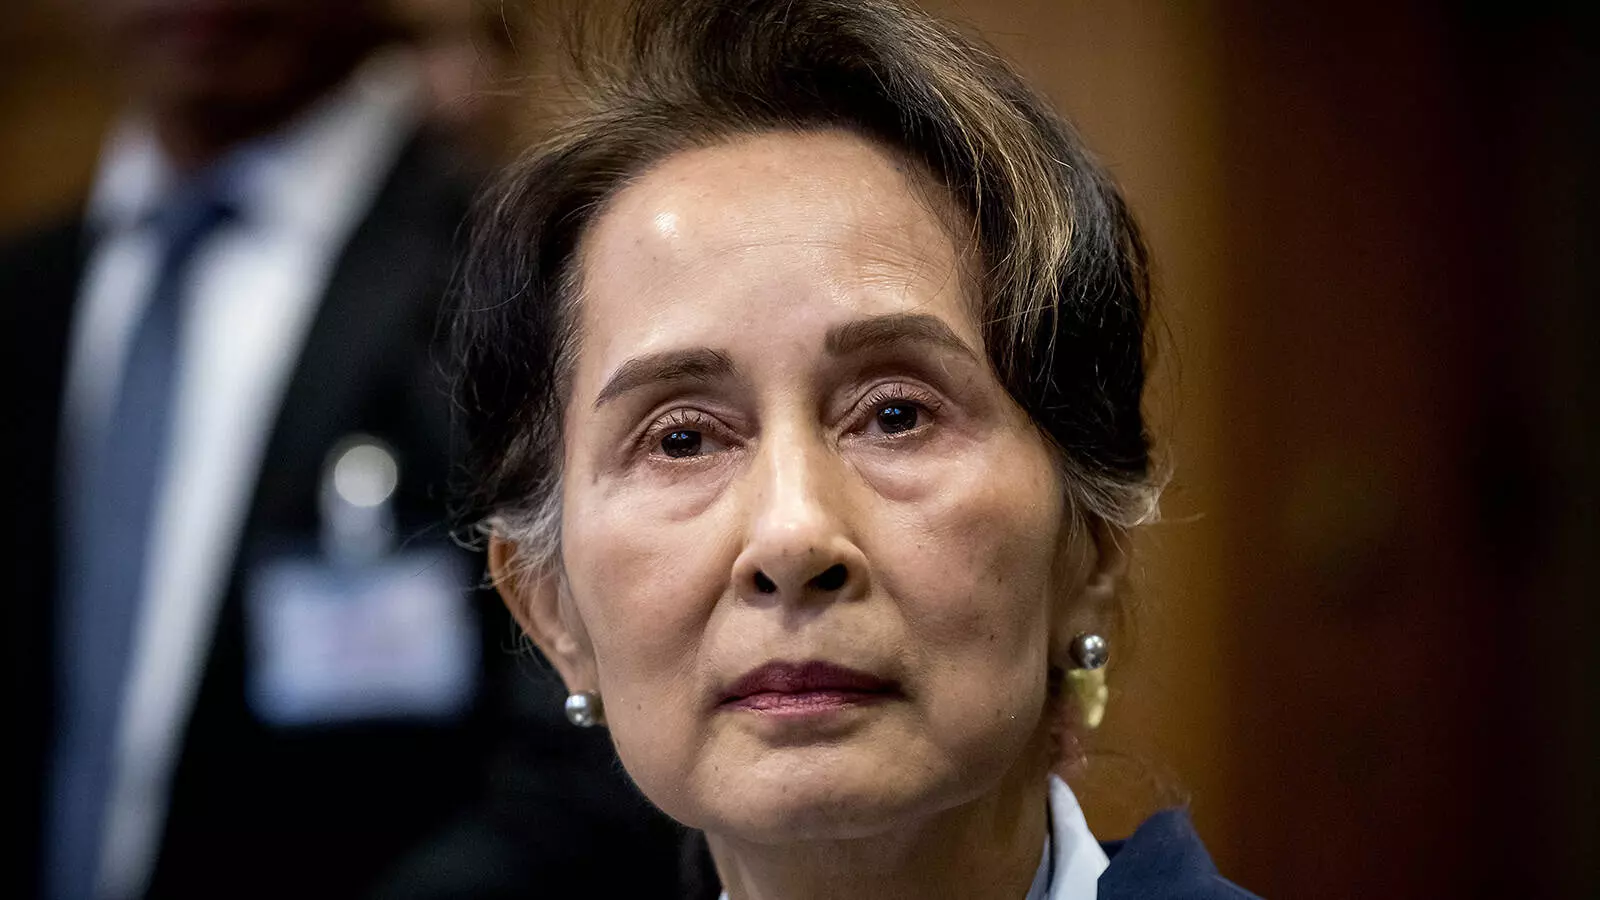 Aung San Suu Kyi sentenced to another 6 years imprisonment